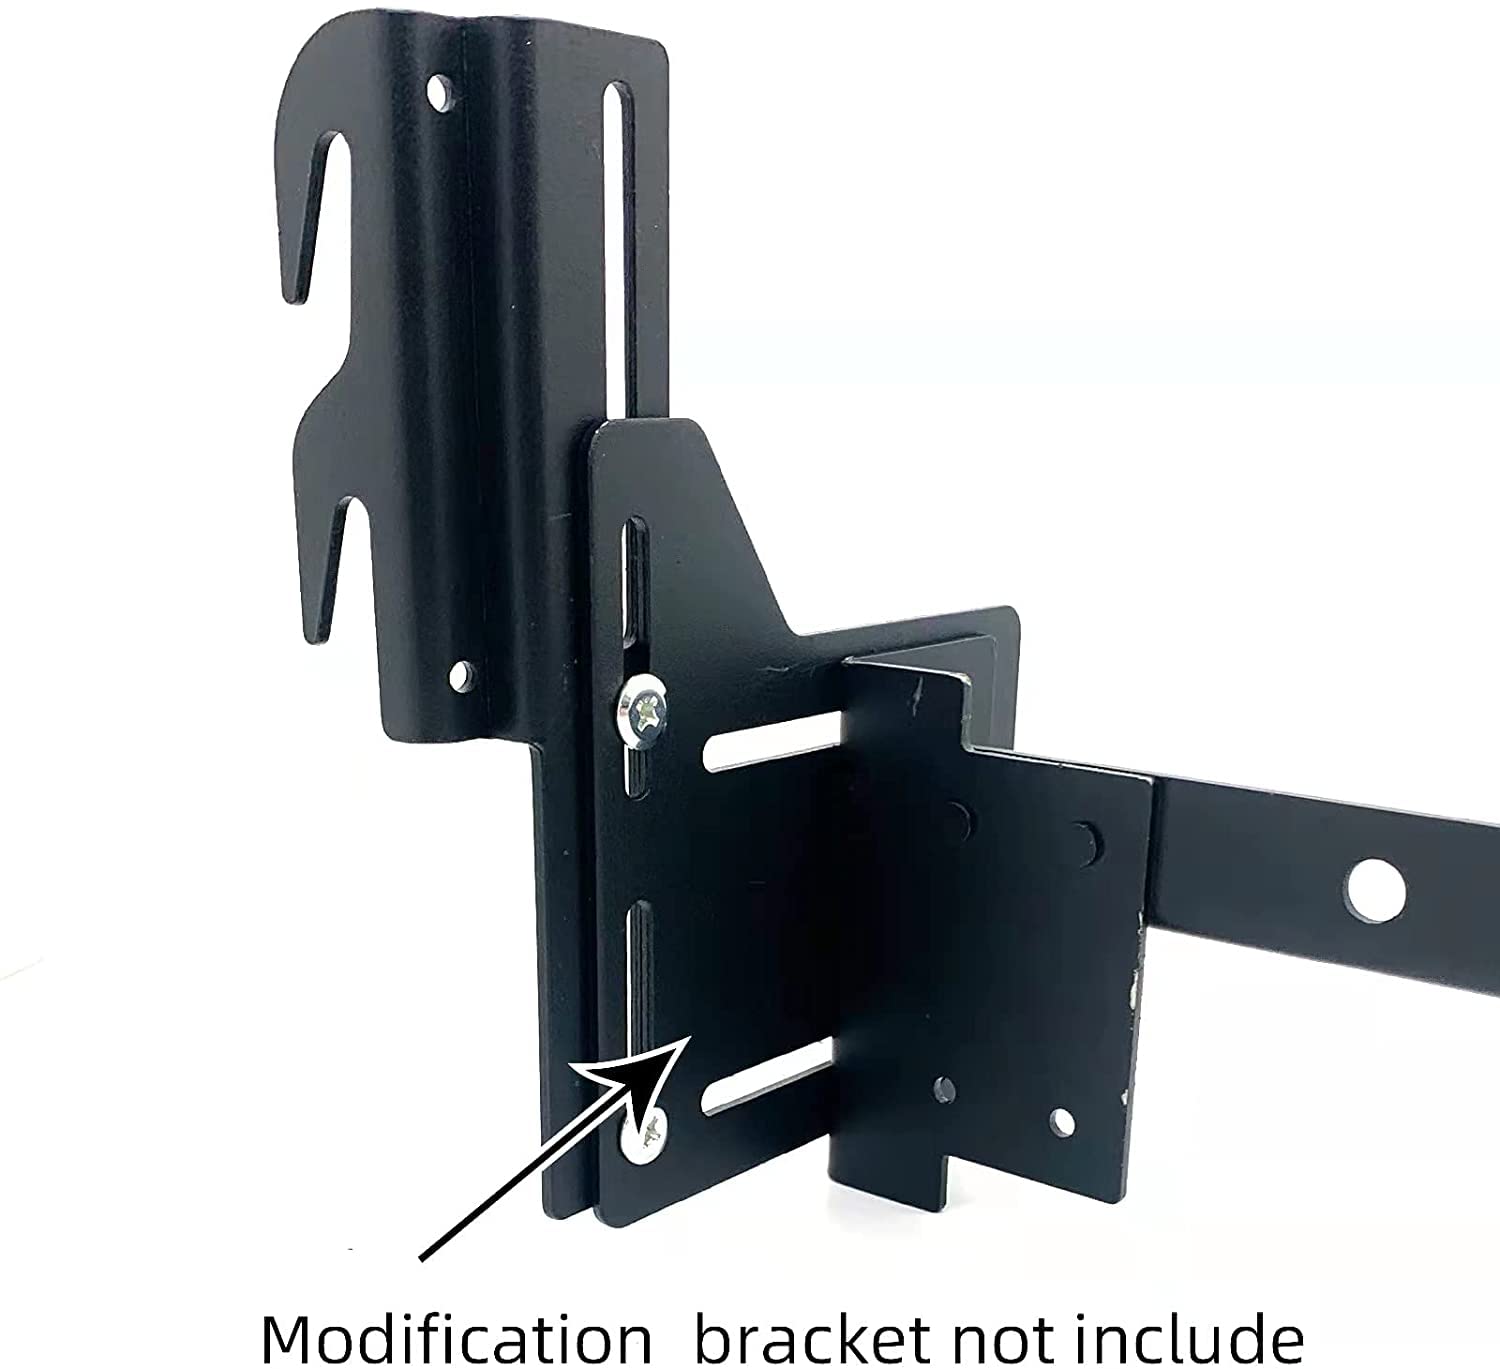 ruiru bro 2Pcs #711 Bolt-On to Hook-On Bed Frame Conversion Brackets for Headboard or Footboard,Bed Hook Adapter kit with Hardware, Hook on Bed Rails Brackets(Black)